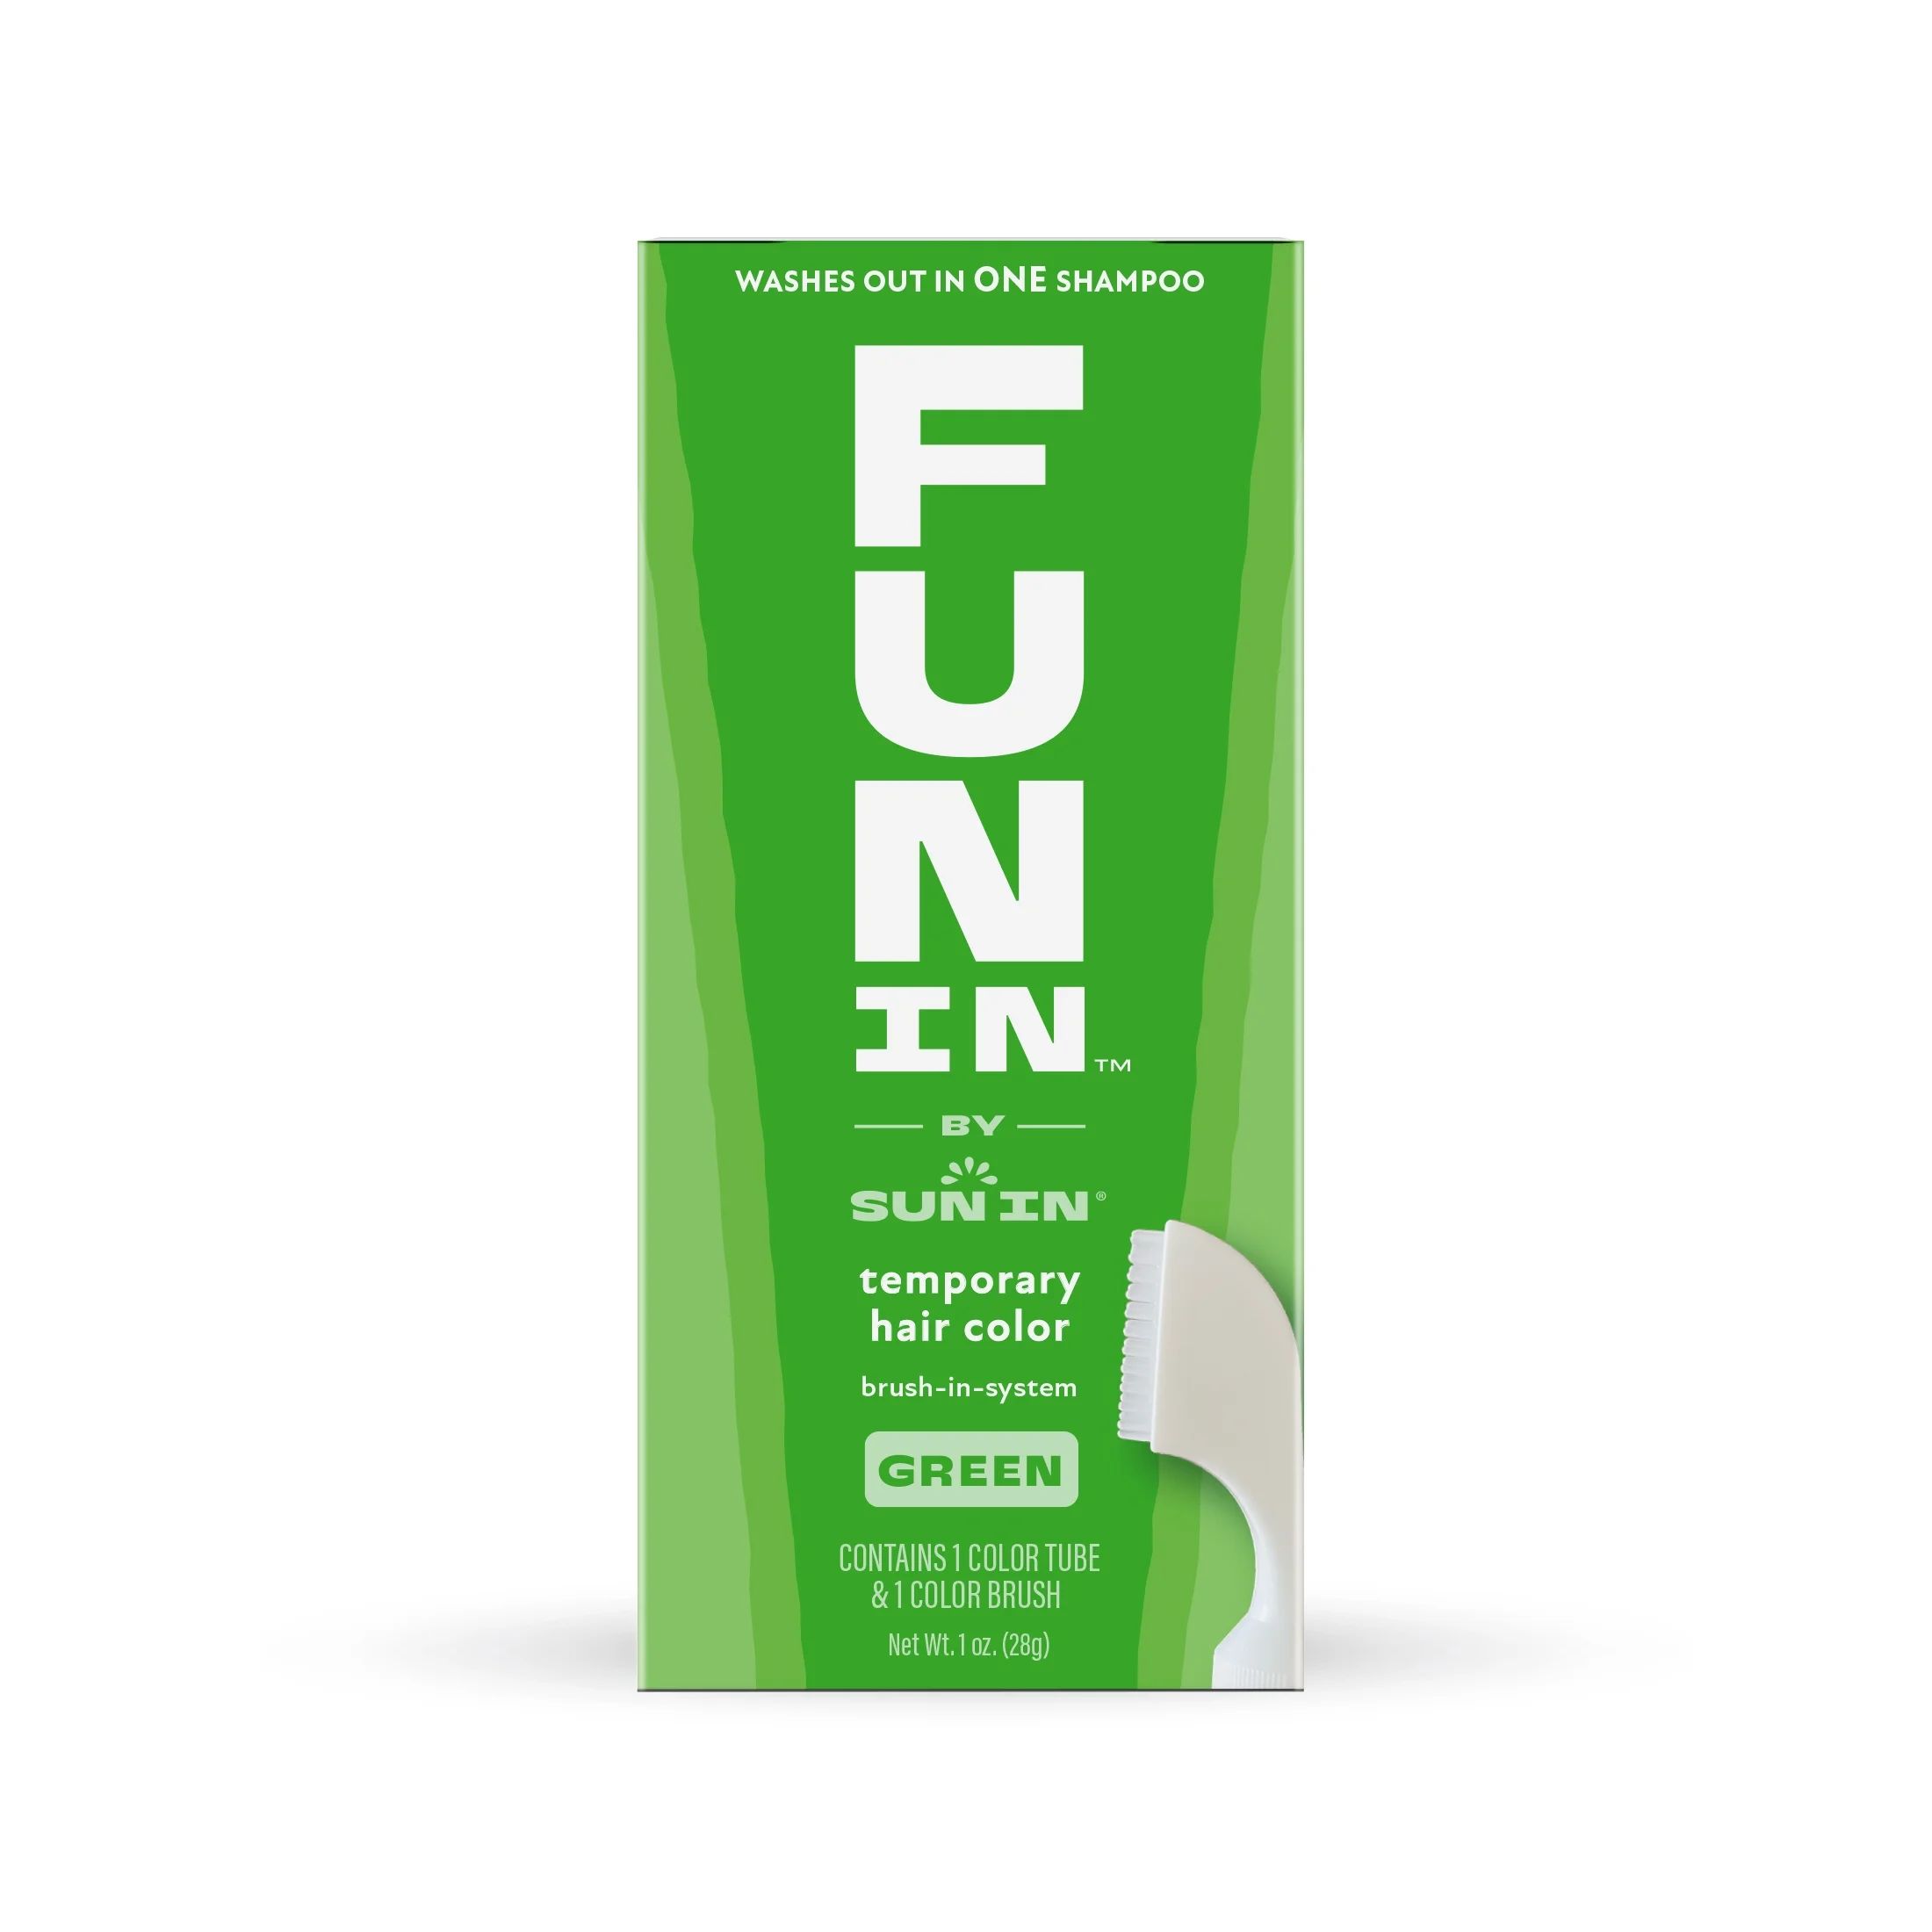 Fun In by Sun In, Temporary Hair Color Brush In System, Green, 1 oz | Walmart (US)